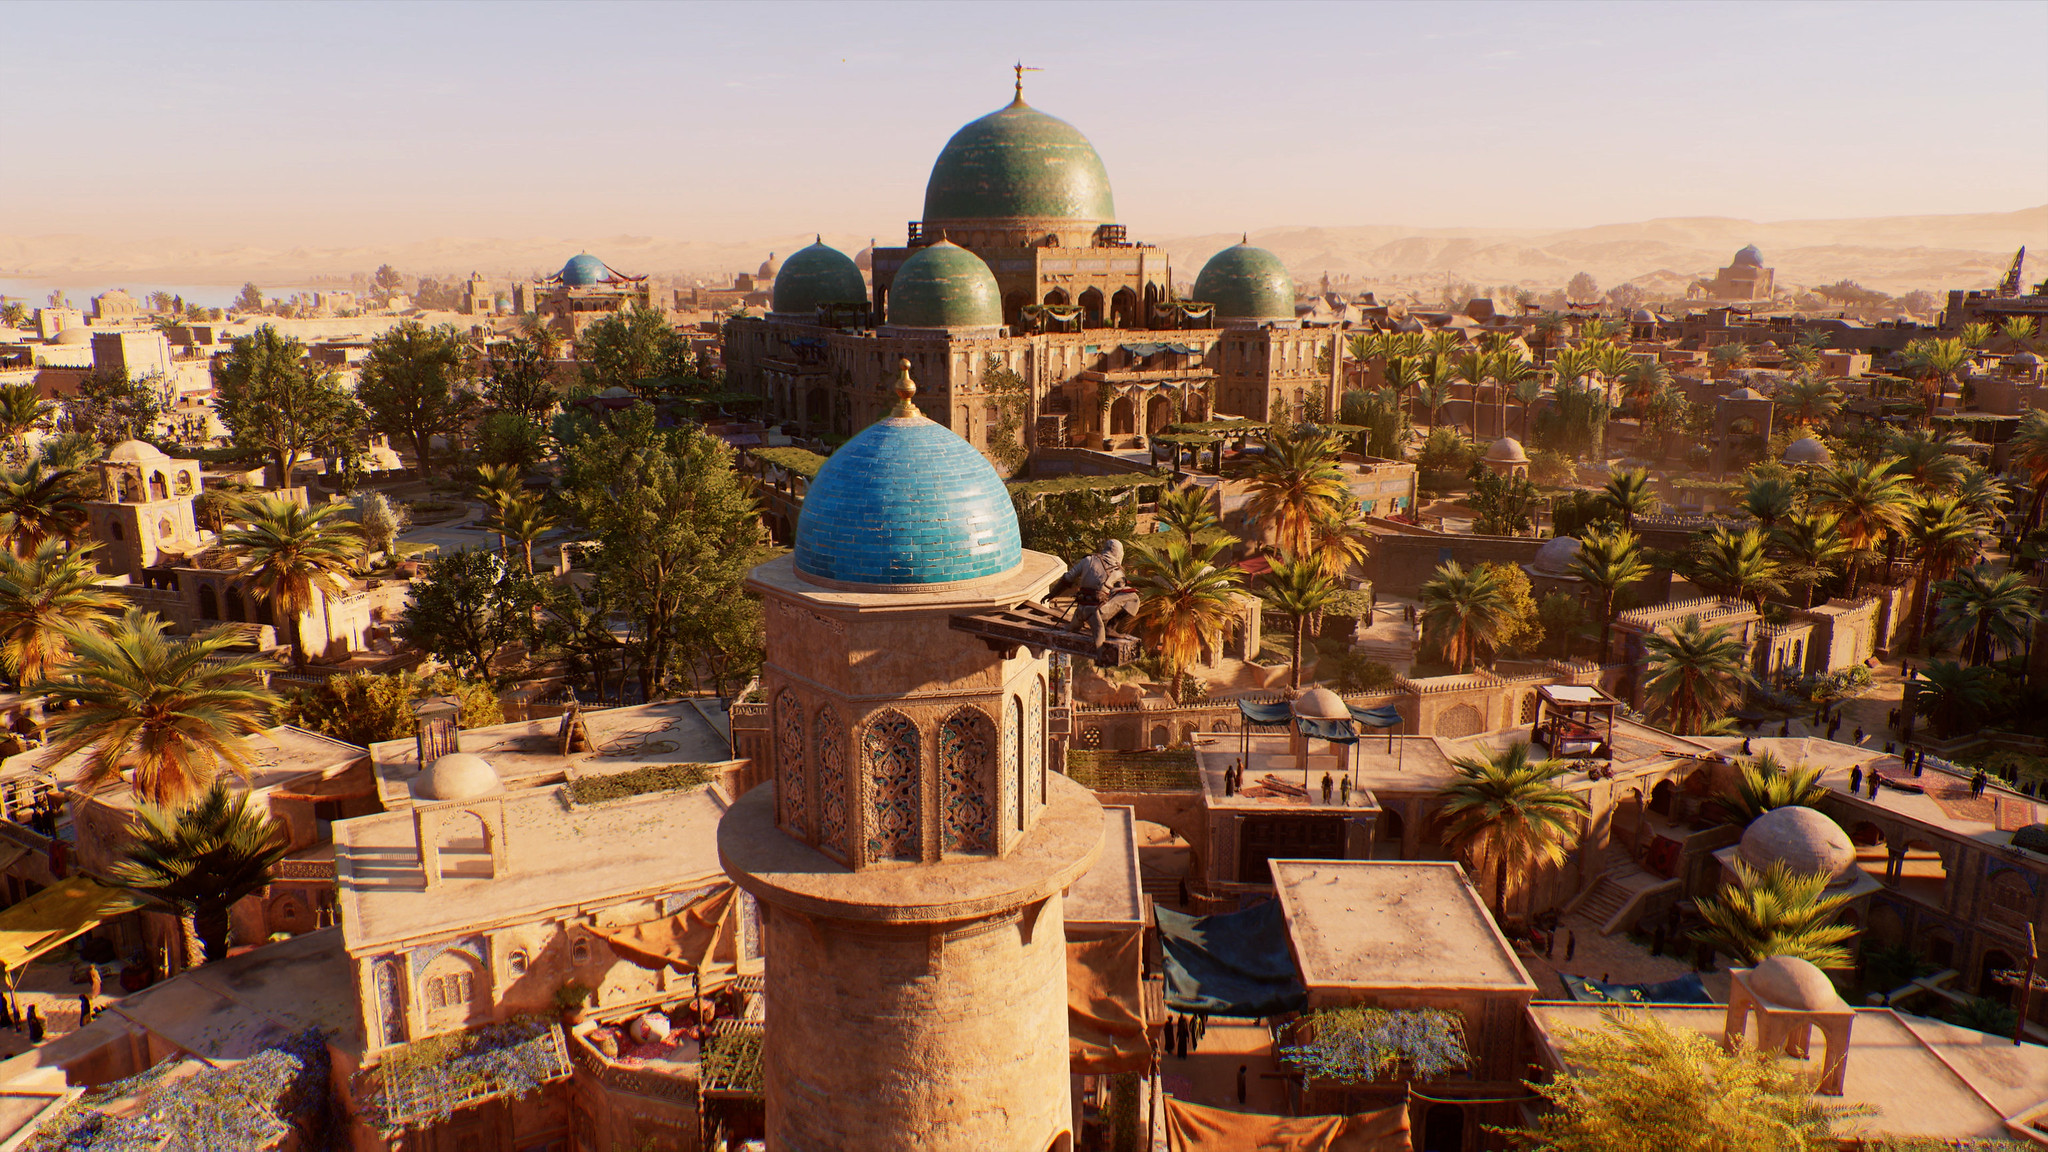 Assassin's Creed Mirage gets new trailer, confirmed Oct. 12 release date